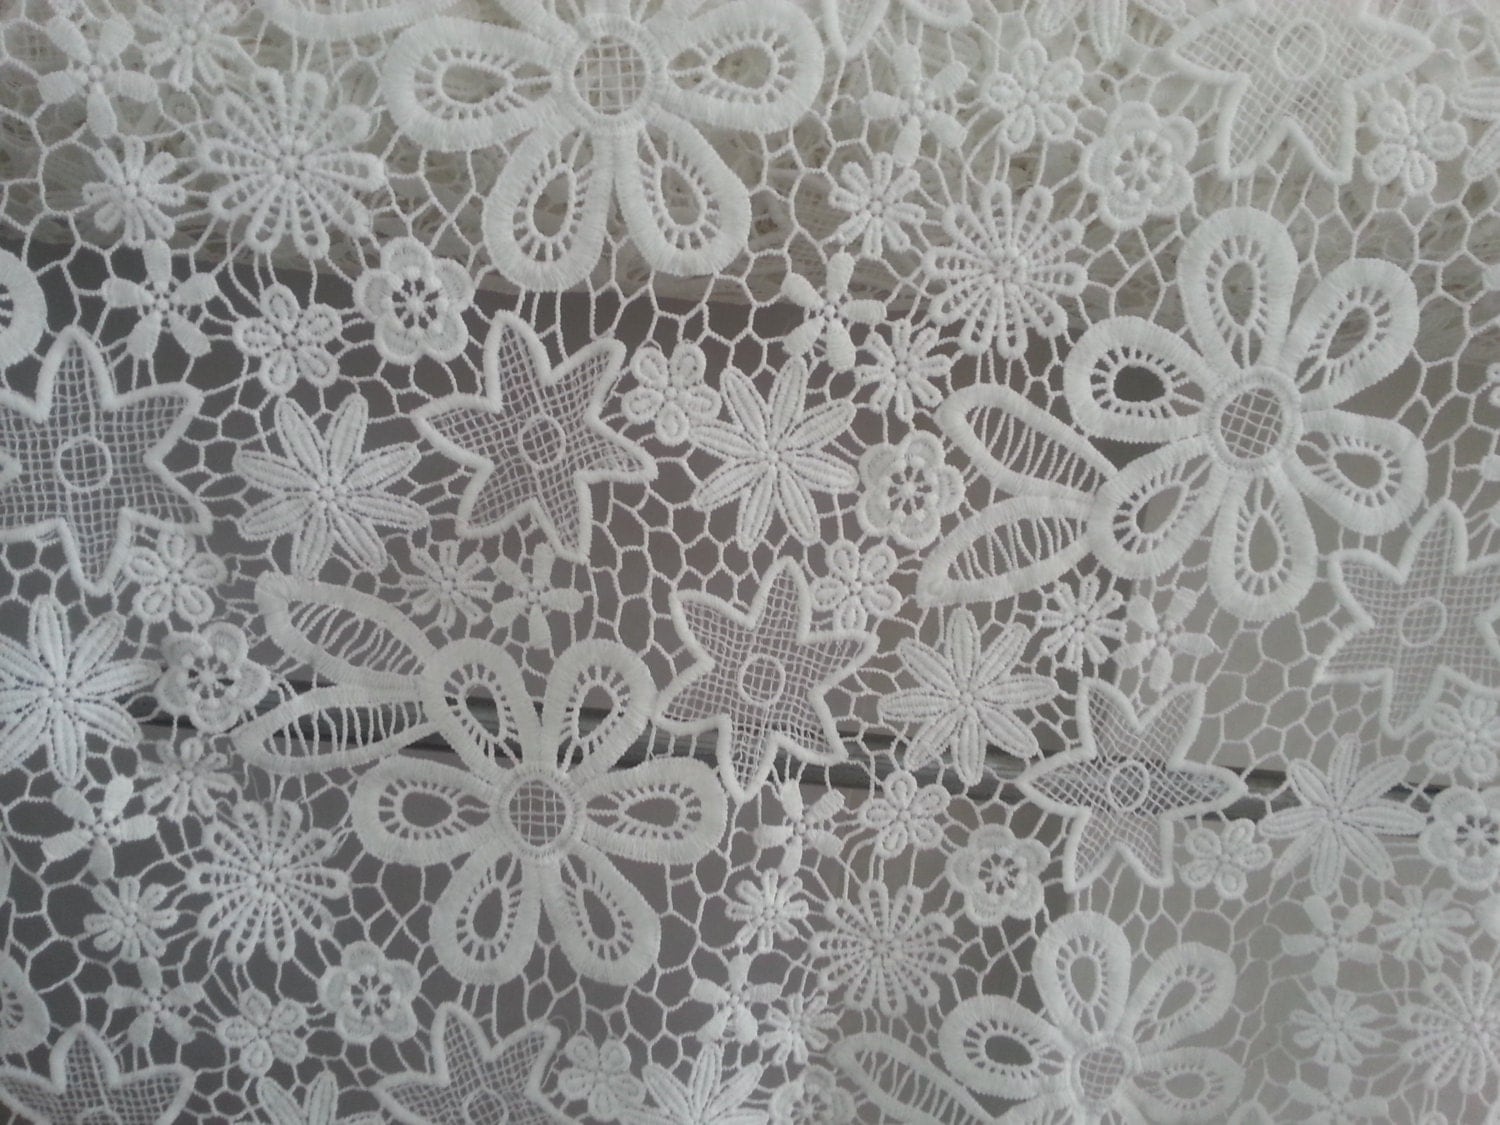 lace fabric vintage lace fabric hollowed out lace fabric